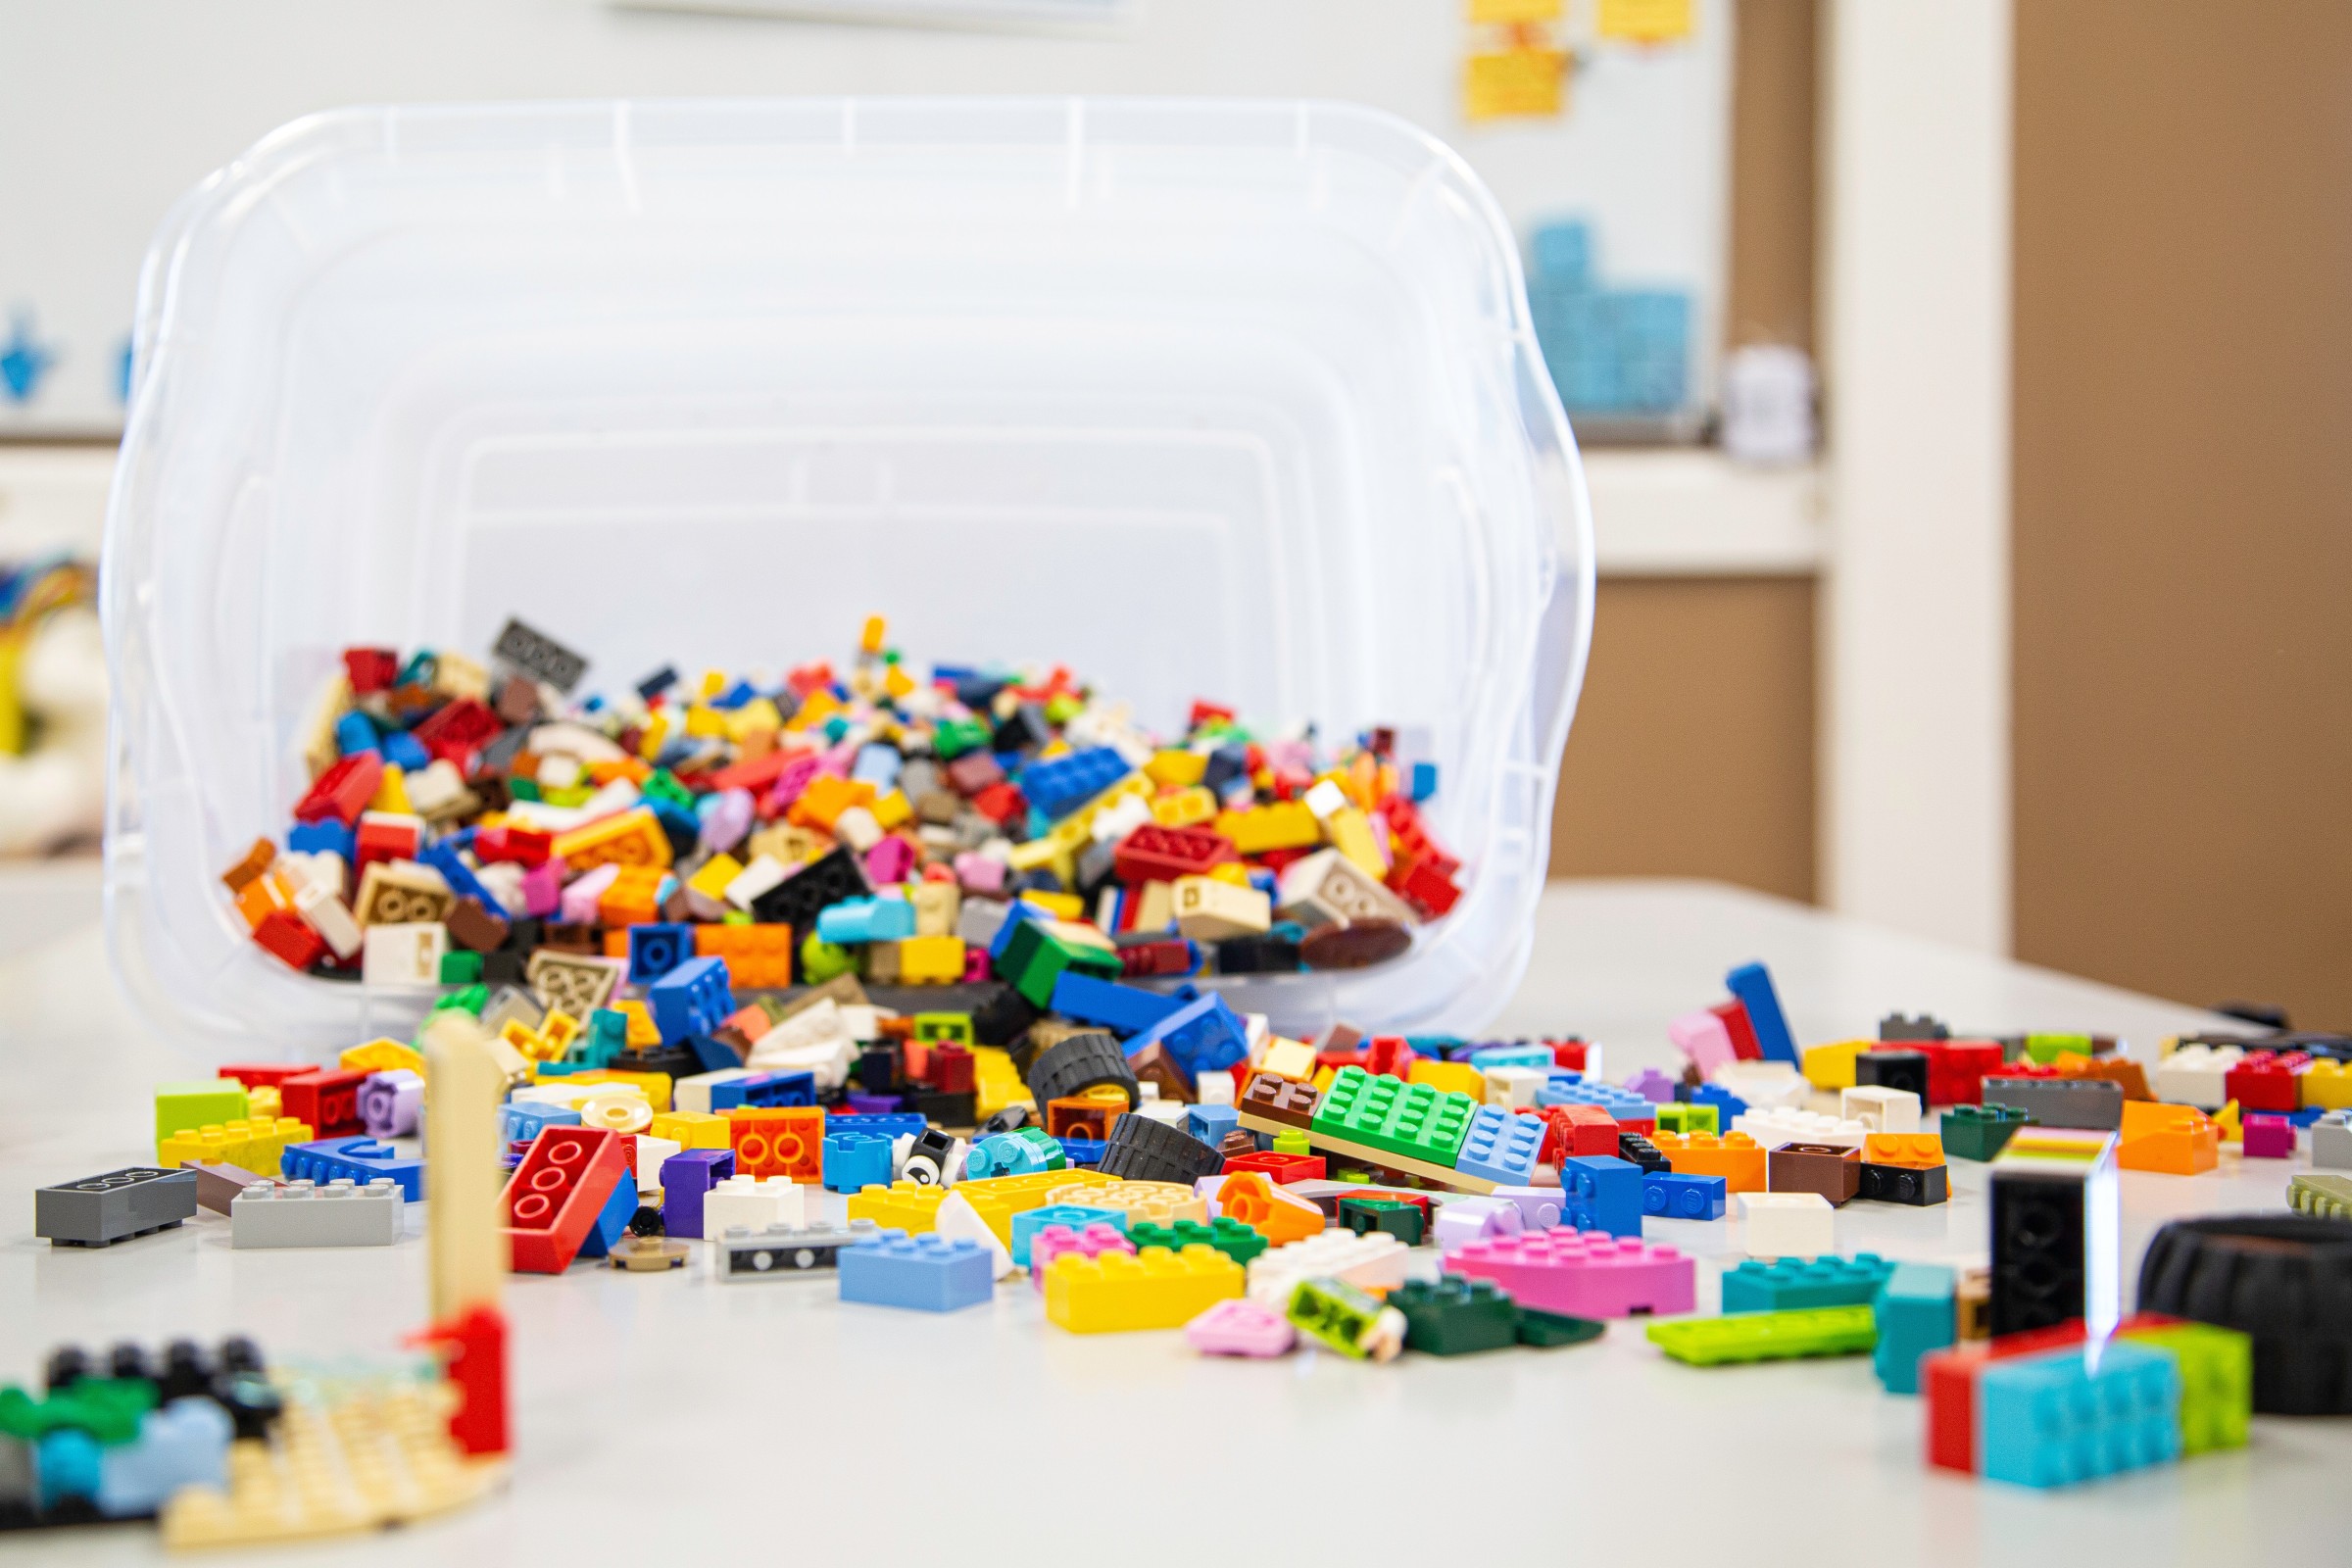 Assorted Lego bricks spilling out on a table